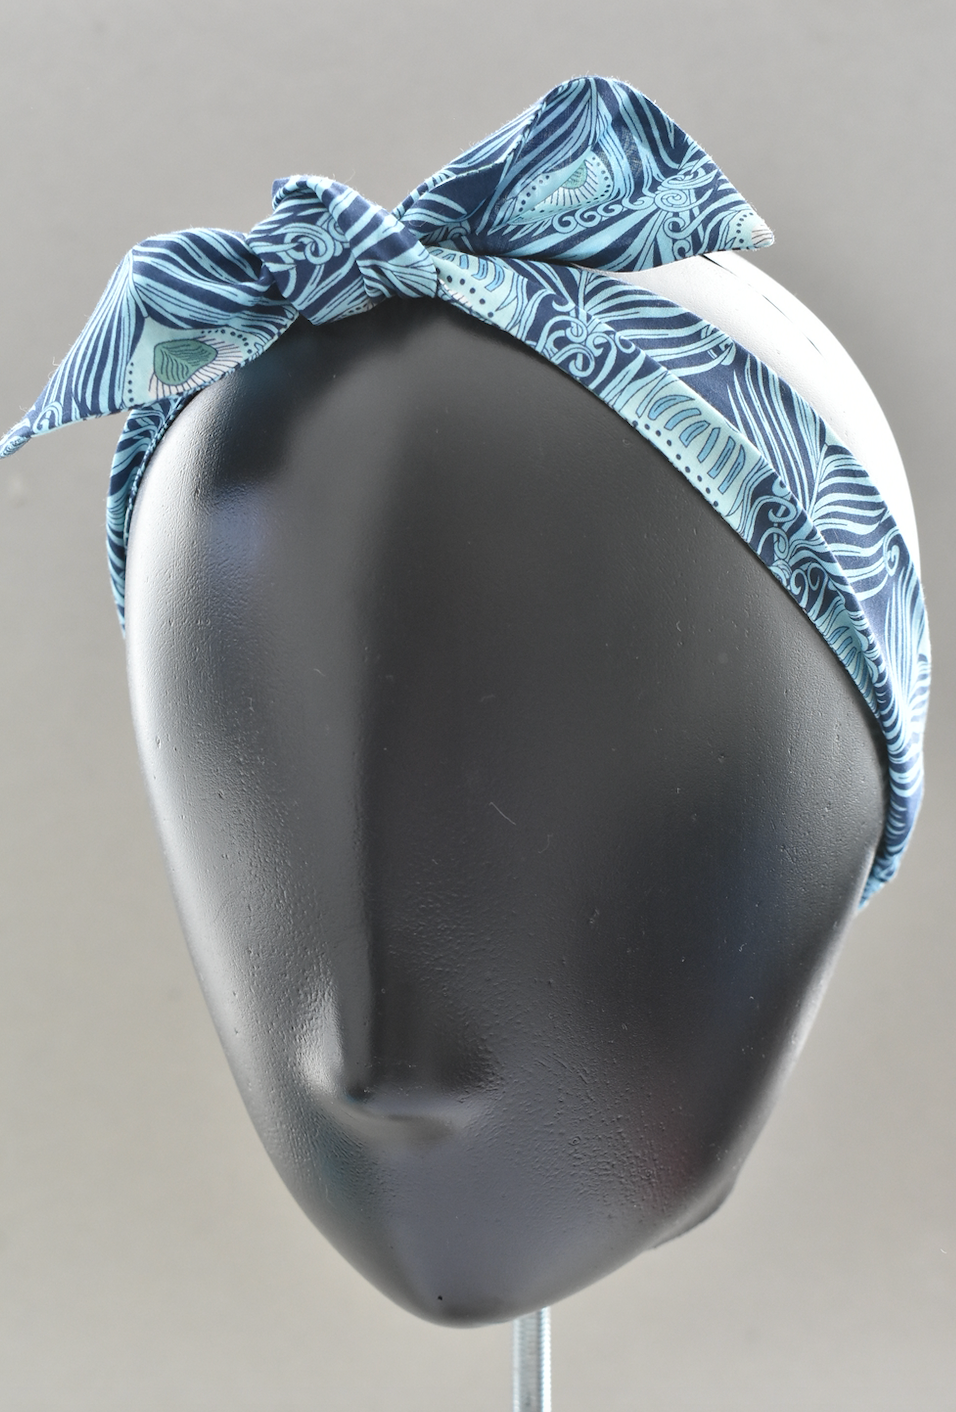 Ladies Knot hairband - Liberty of London Caesar Peacock Feather